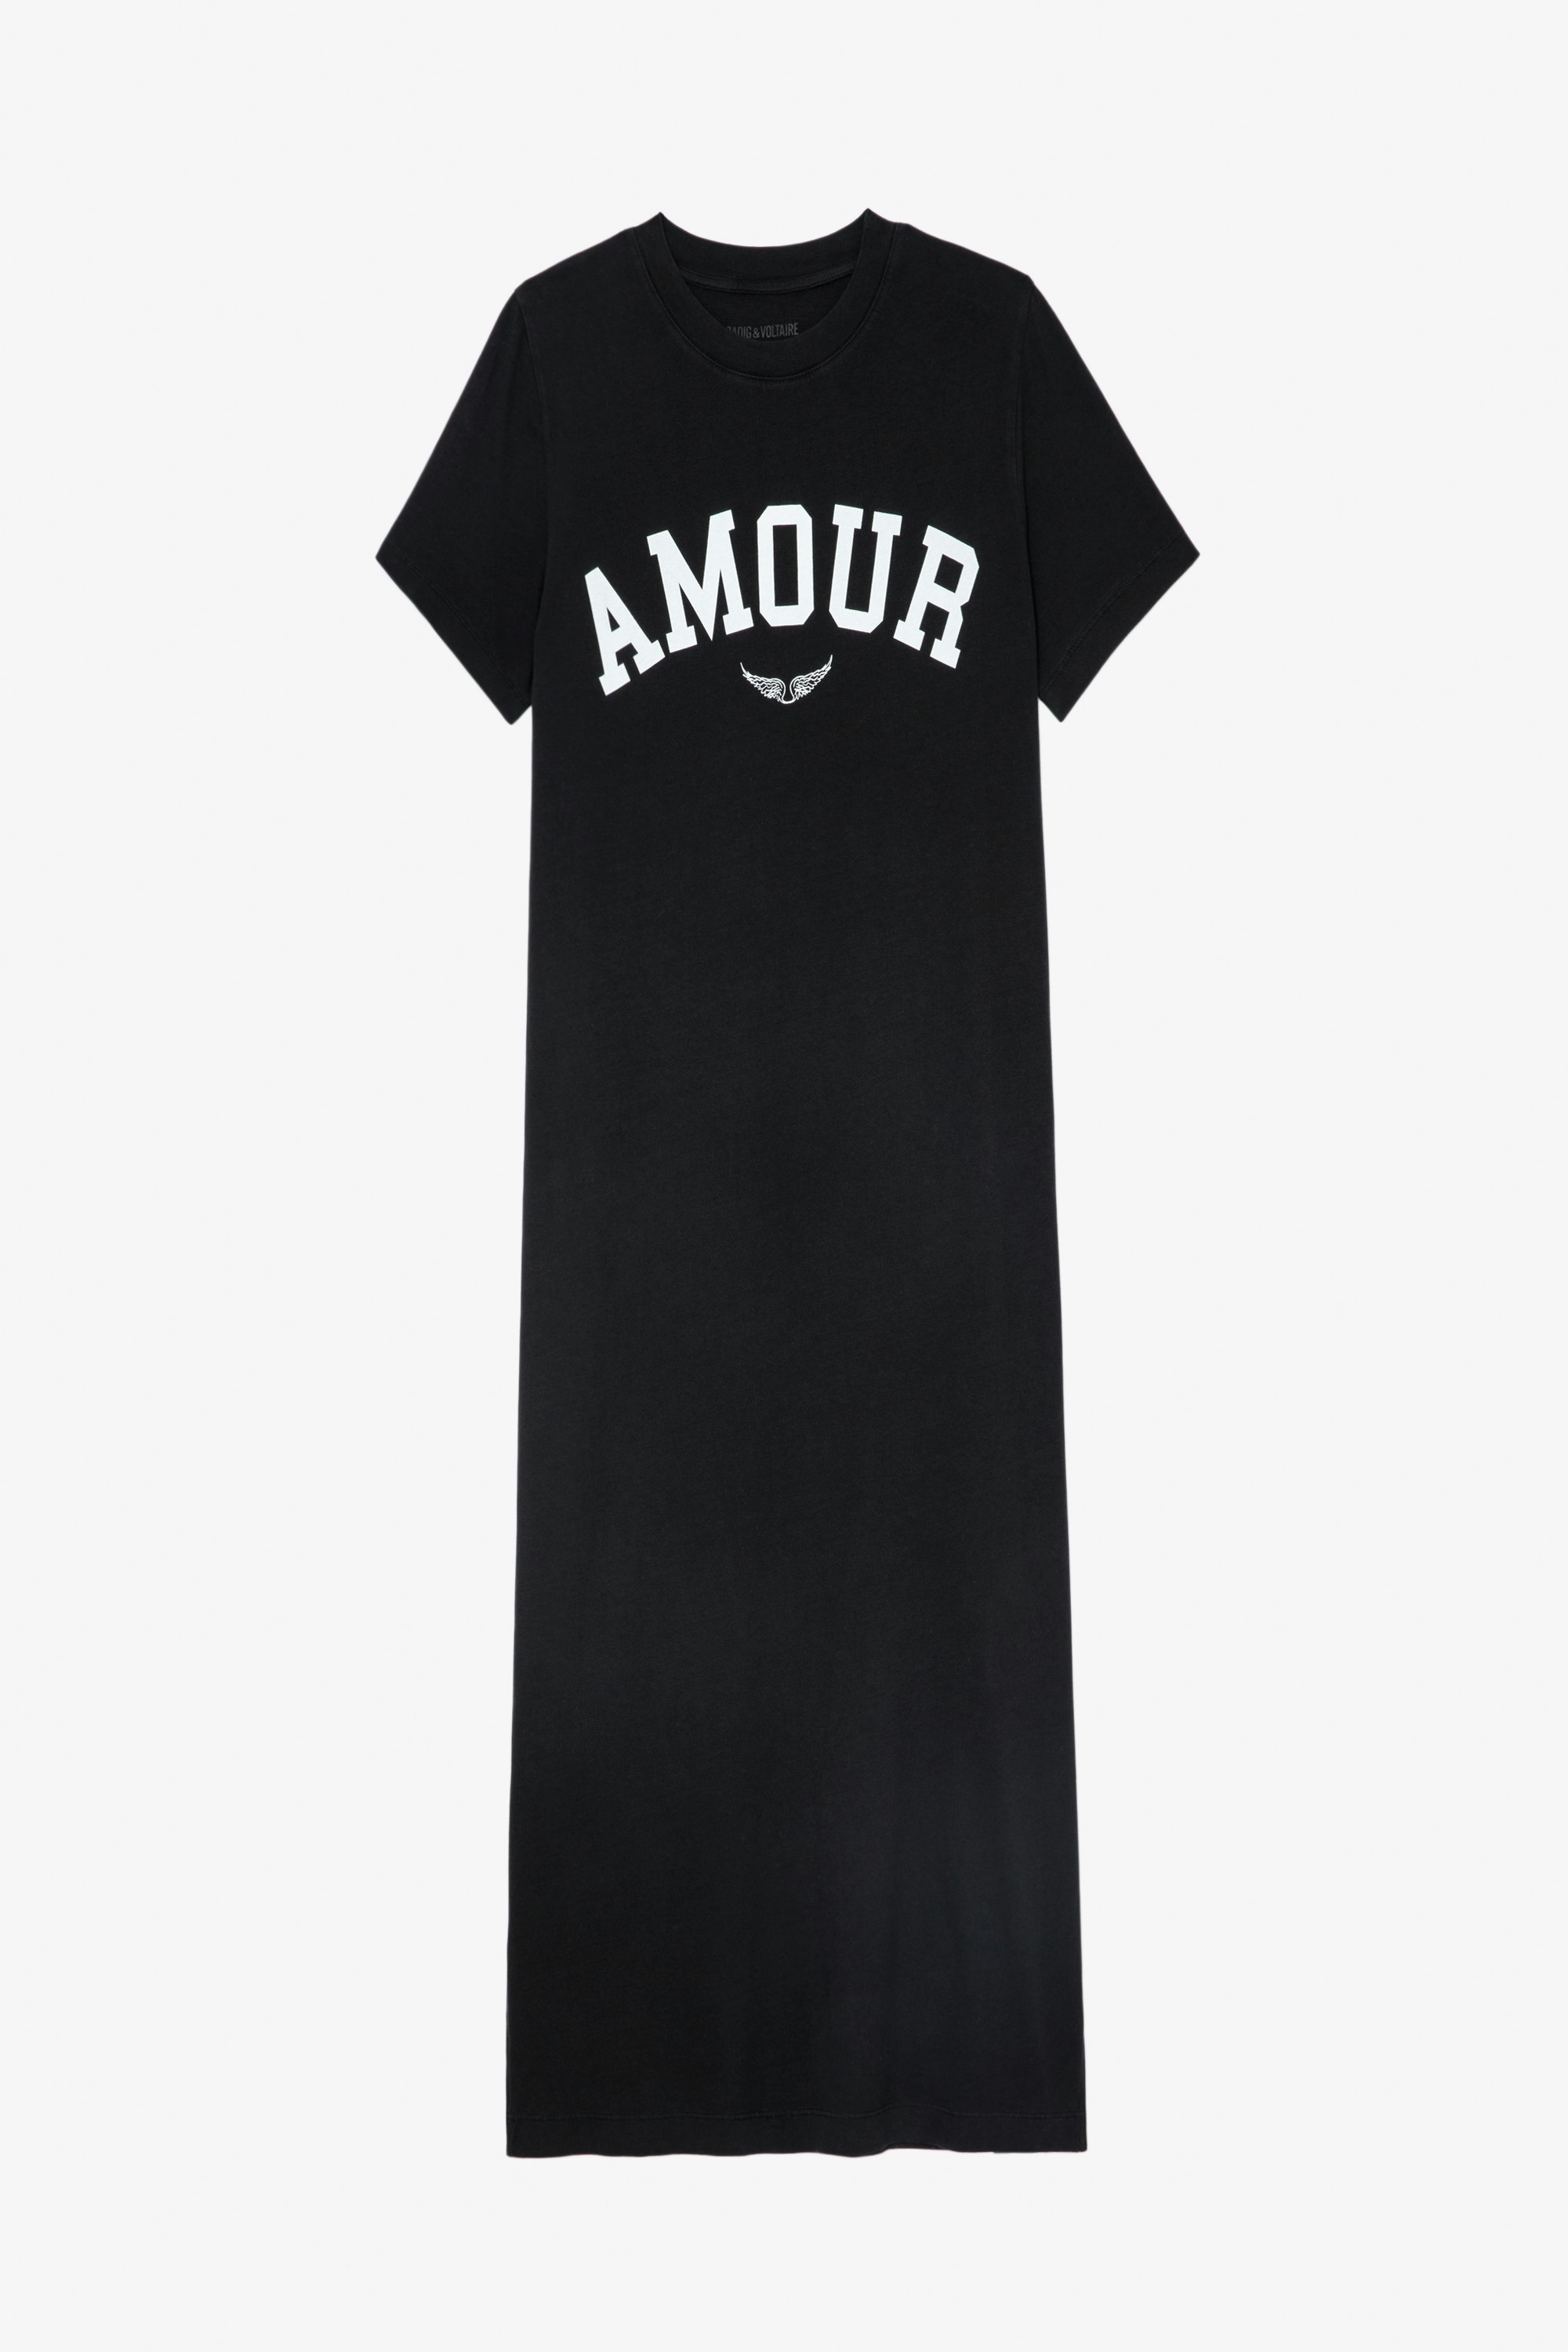 Zaid Dress Women's long black cotton dress with "Amour" slogan and wings